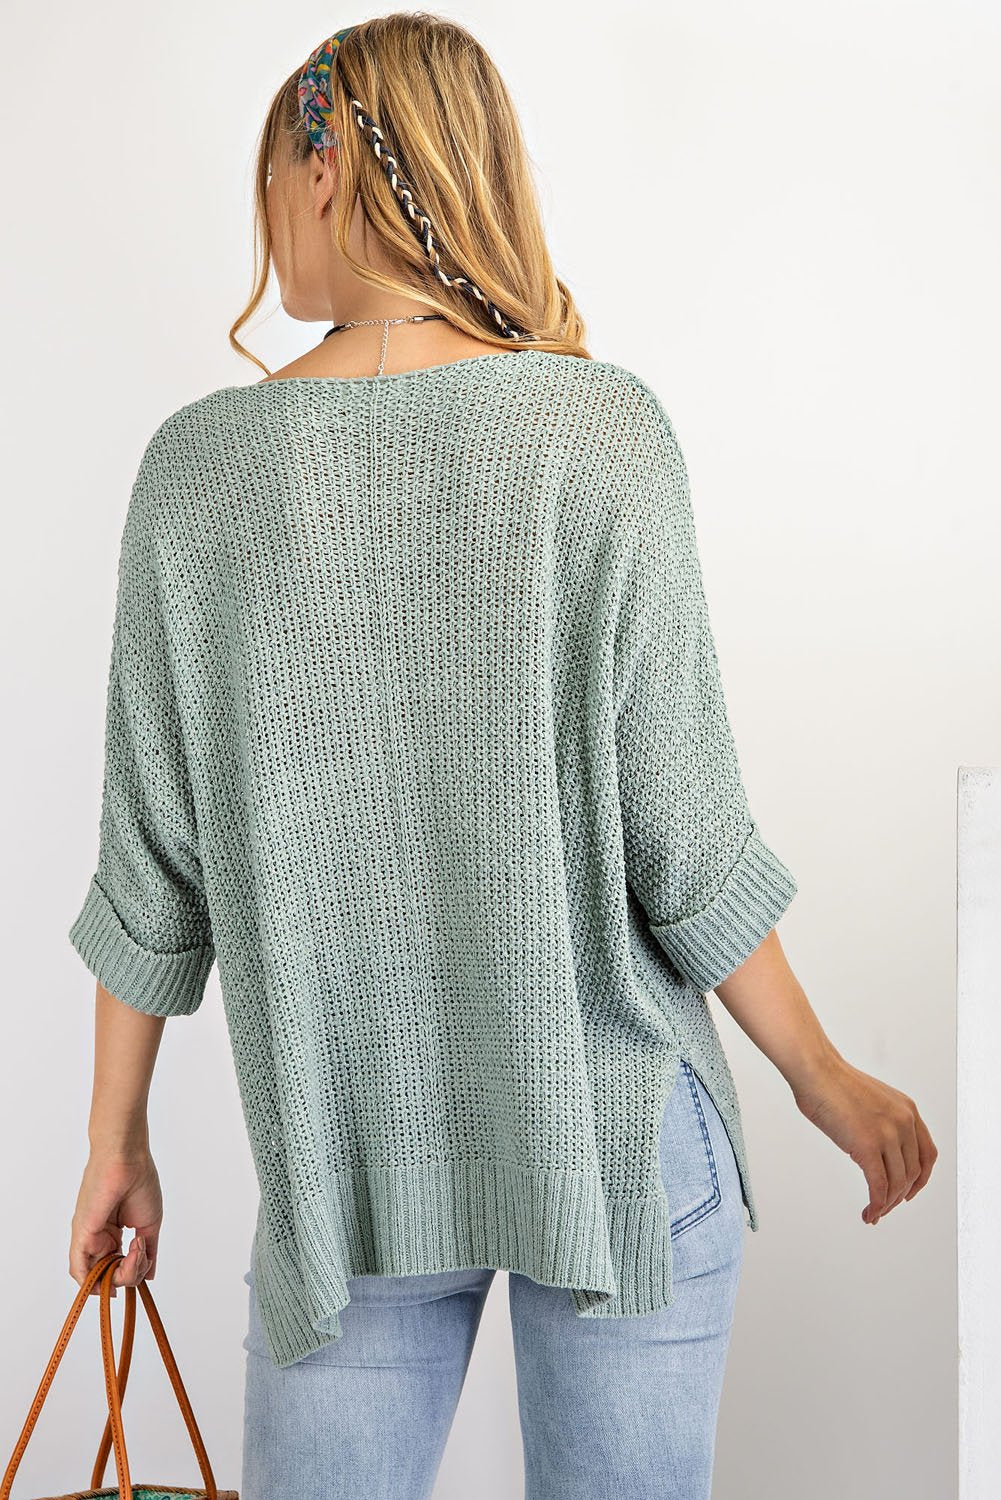 It's a Breeze Sweater Knit Top - Lightweight Sweater Knit Loose Fit Top